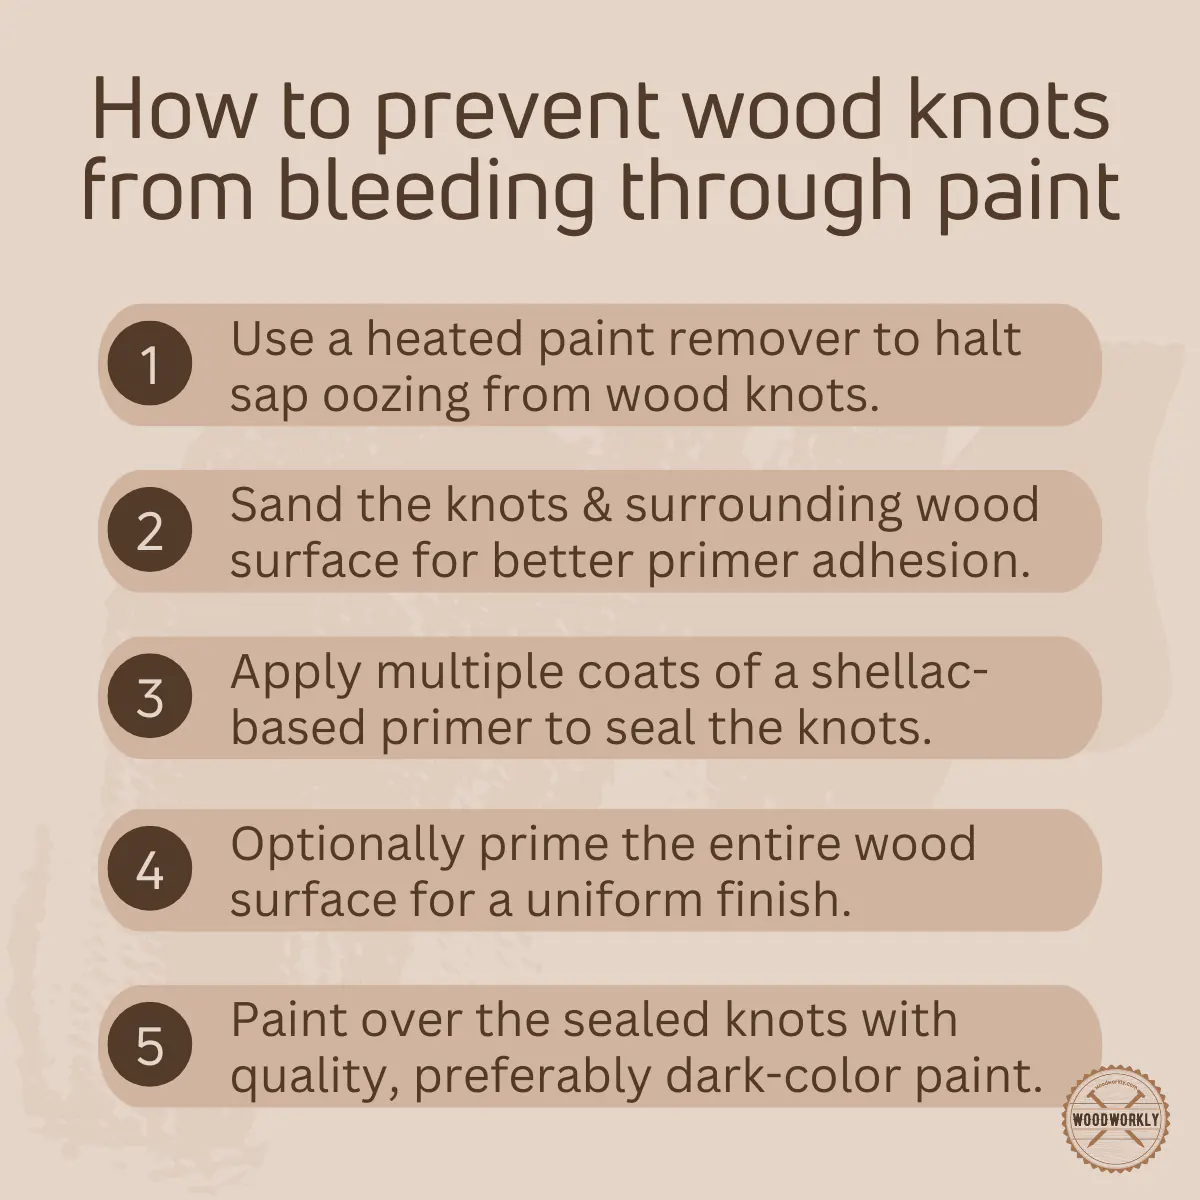 How to prevent wood knots from bleeding through paint